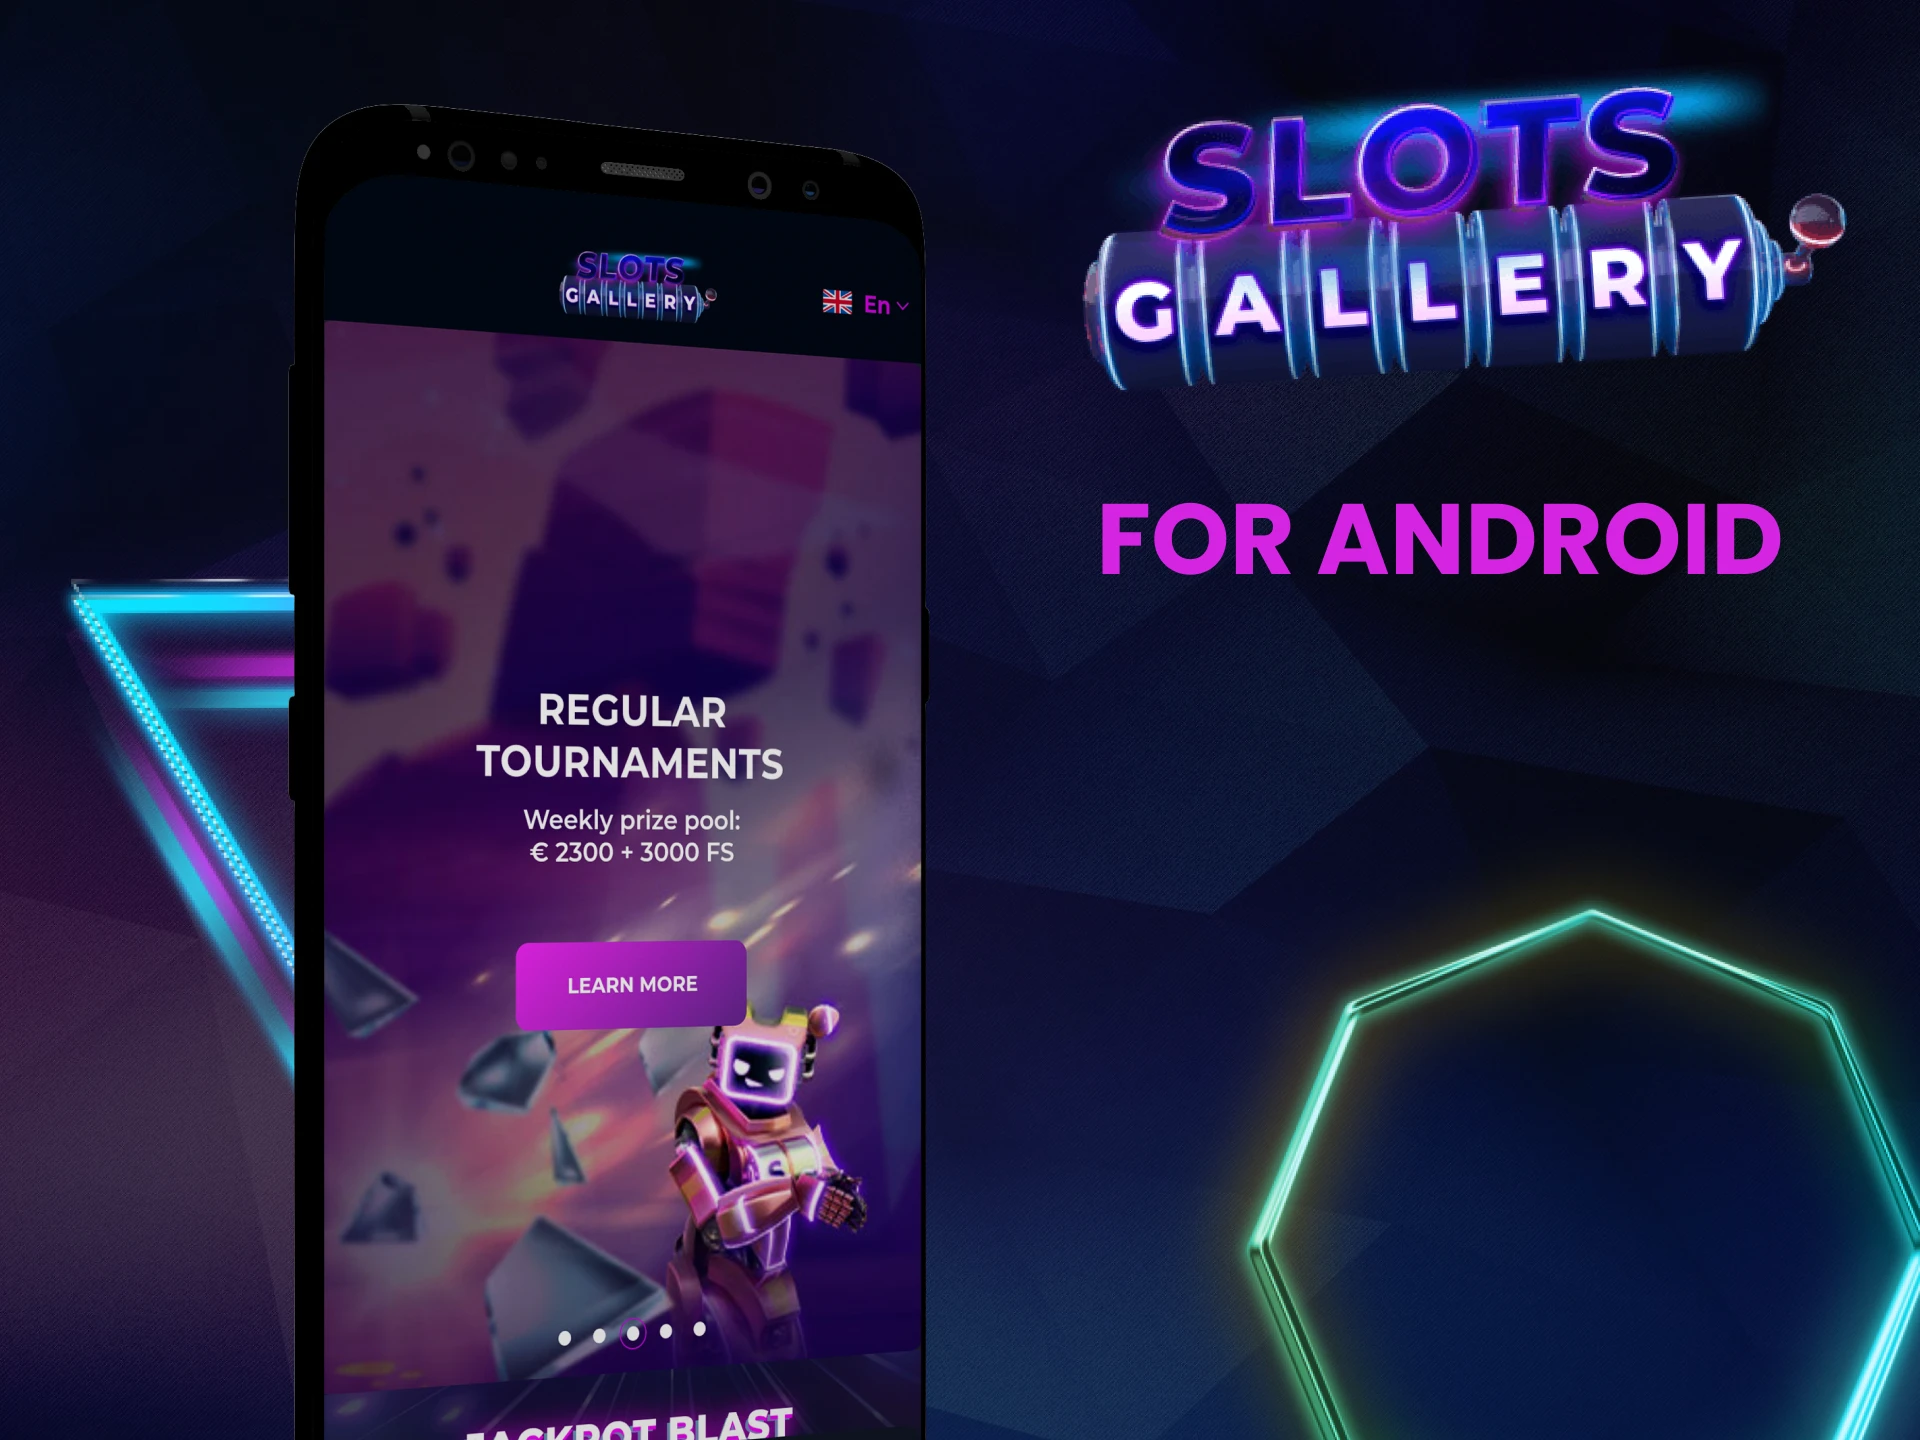 Download the Slots Gallery app for Android.